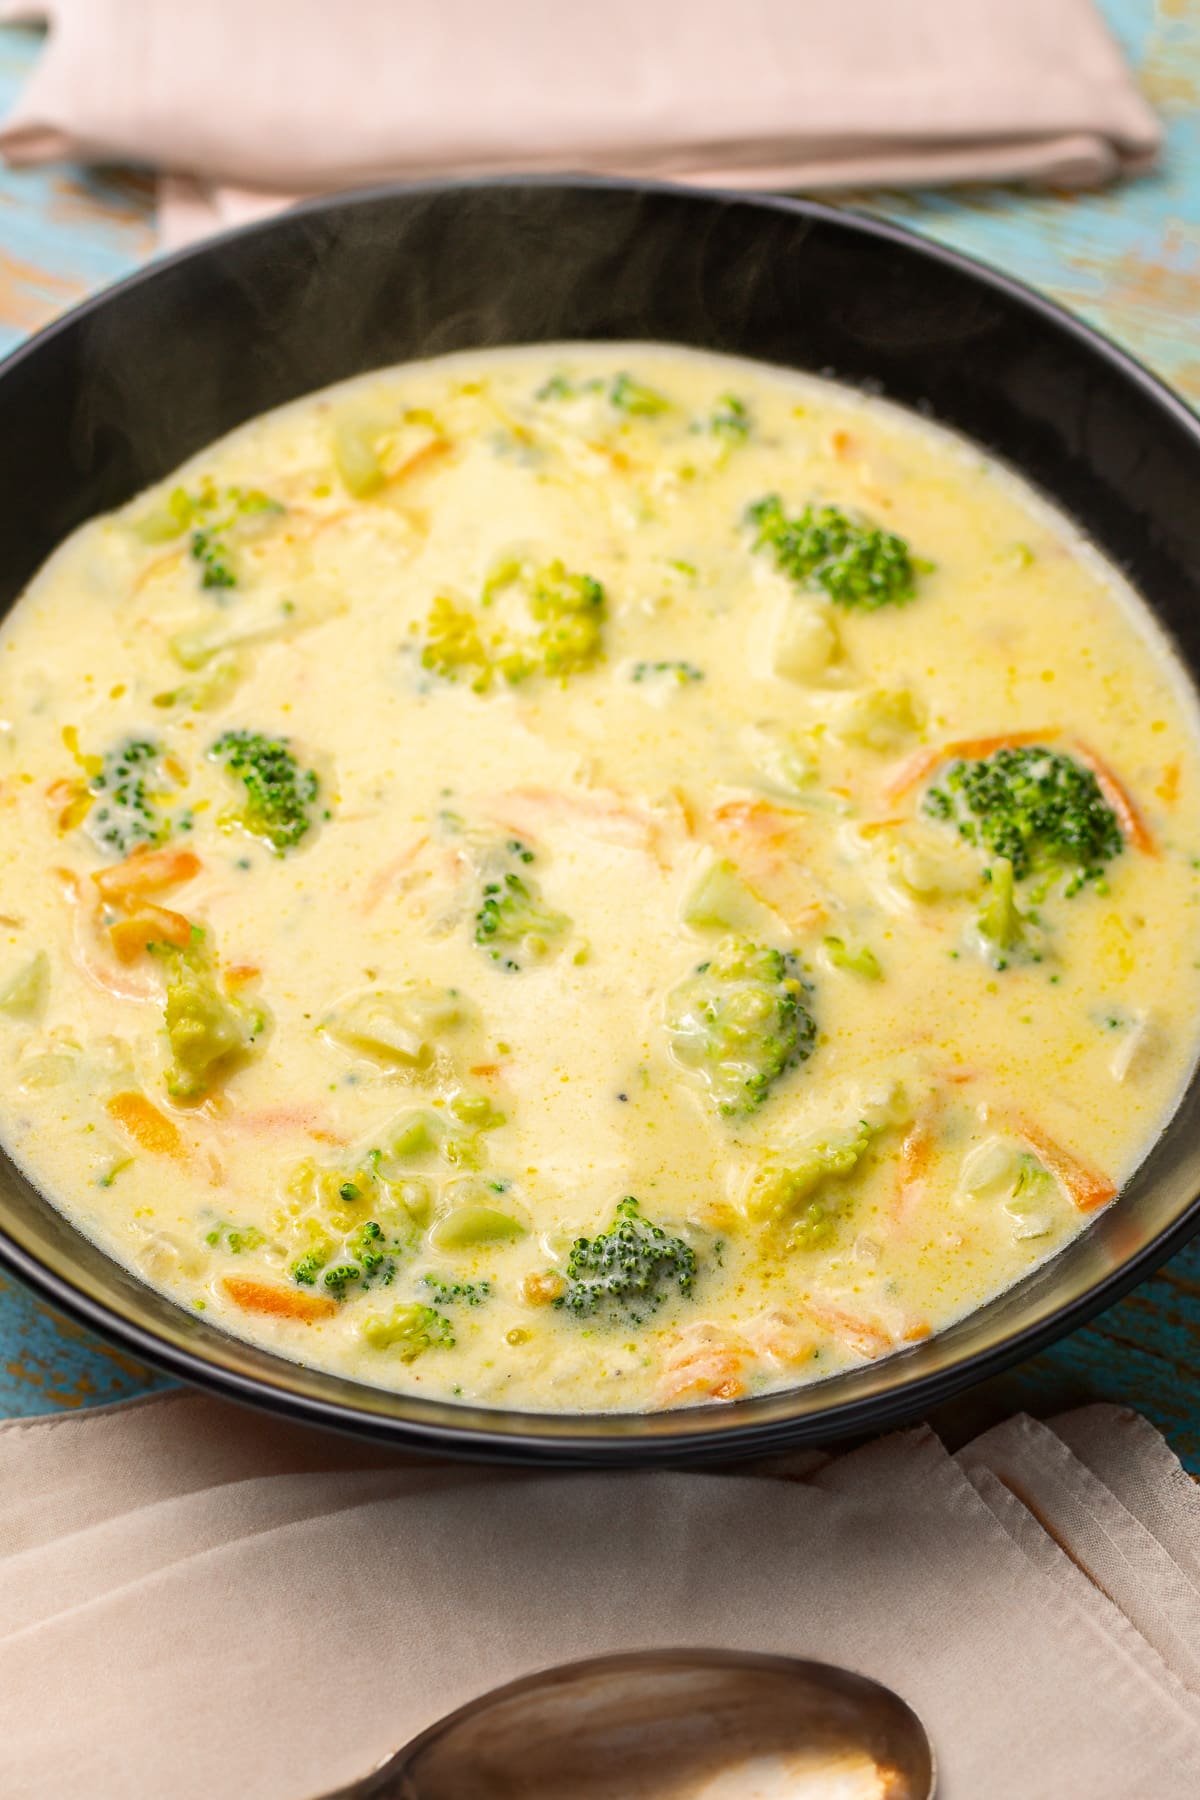 Creamy broccoli cheese soup with carrots in a black plate.